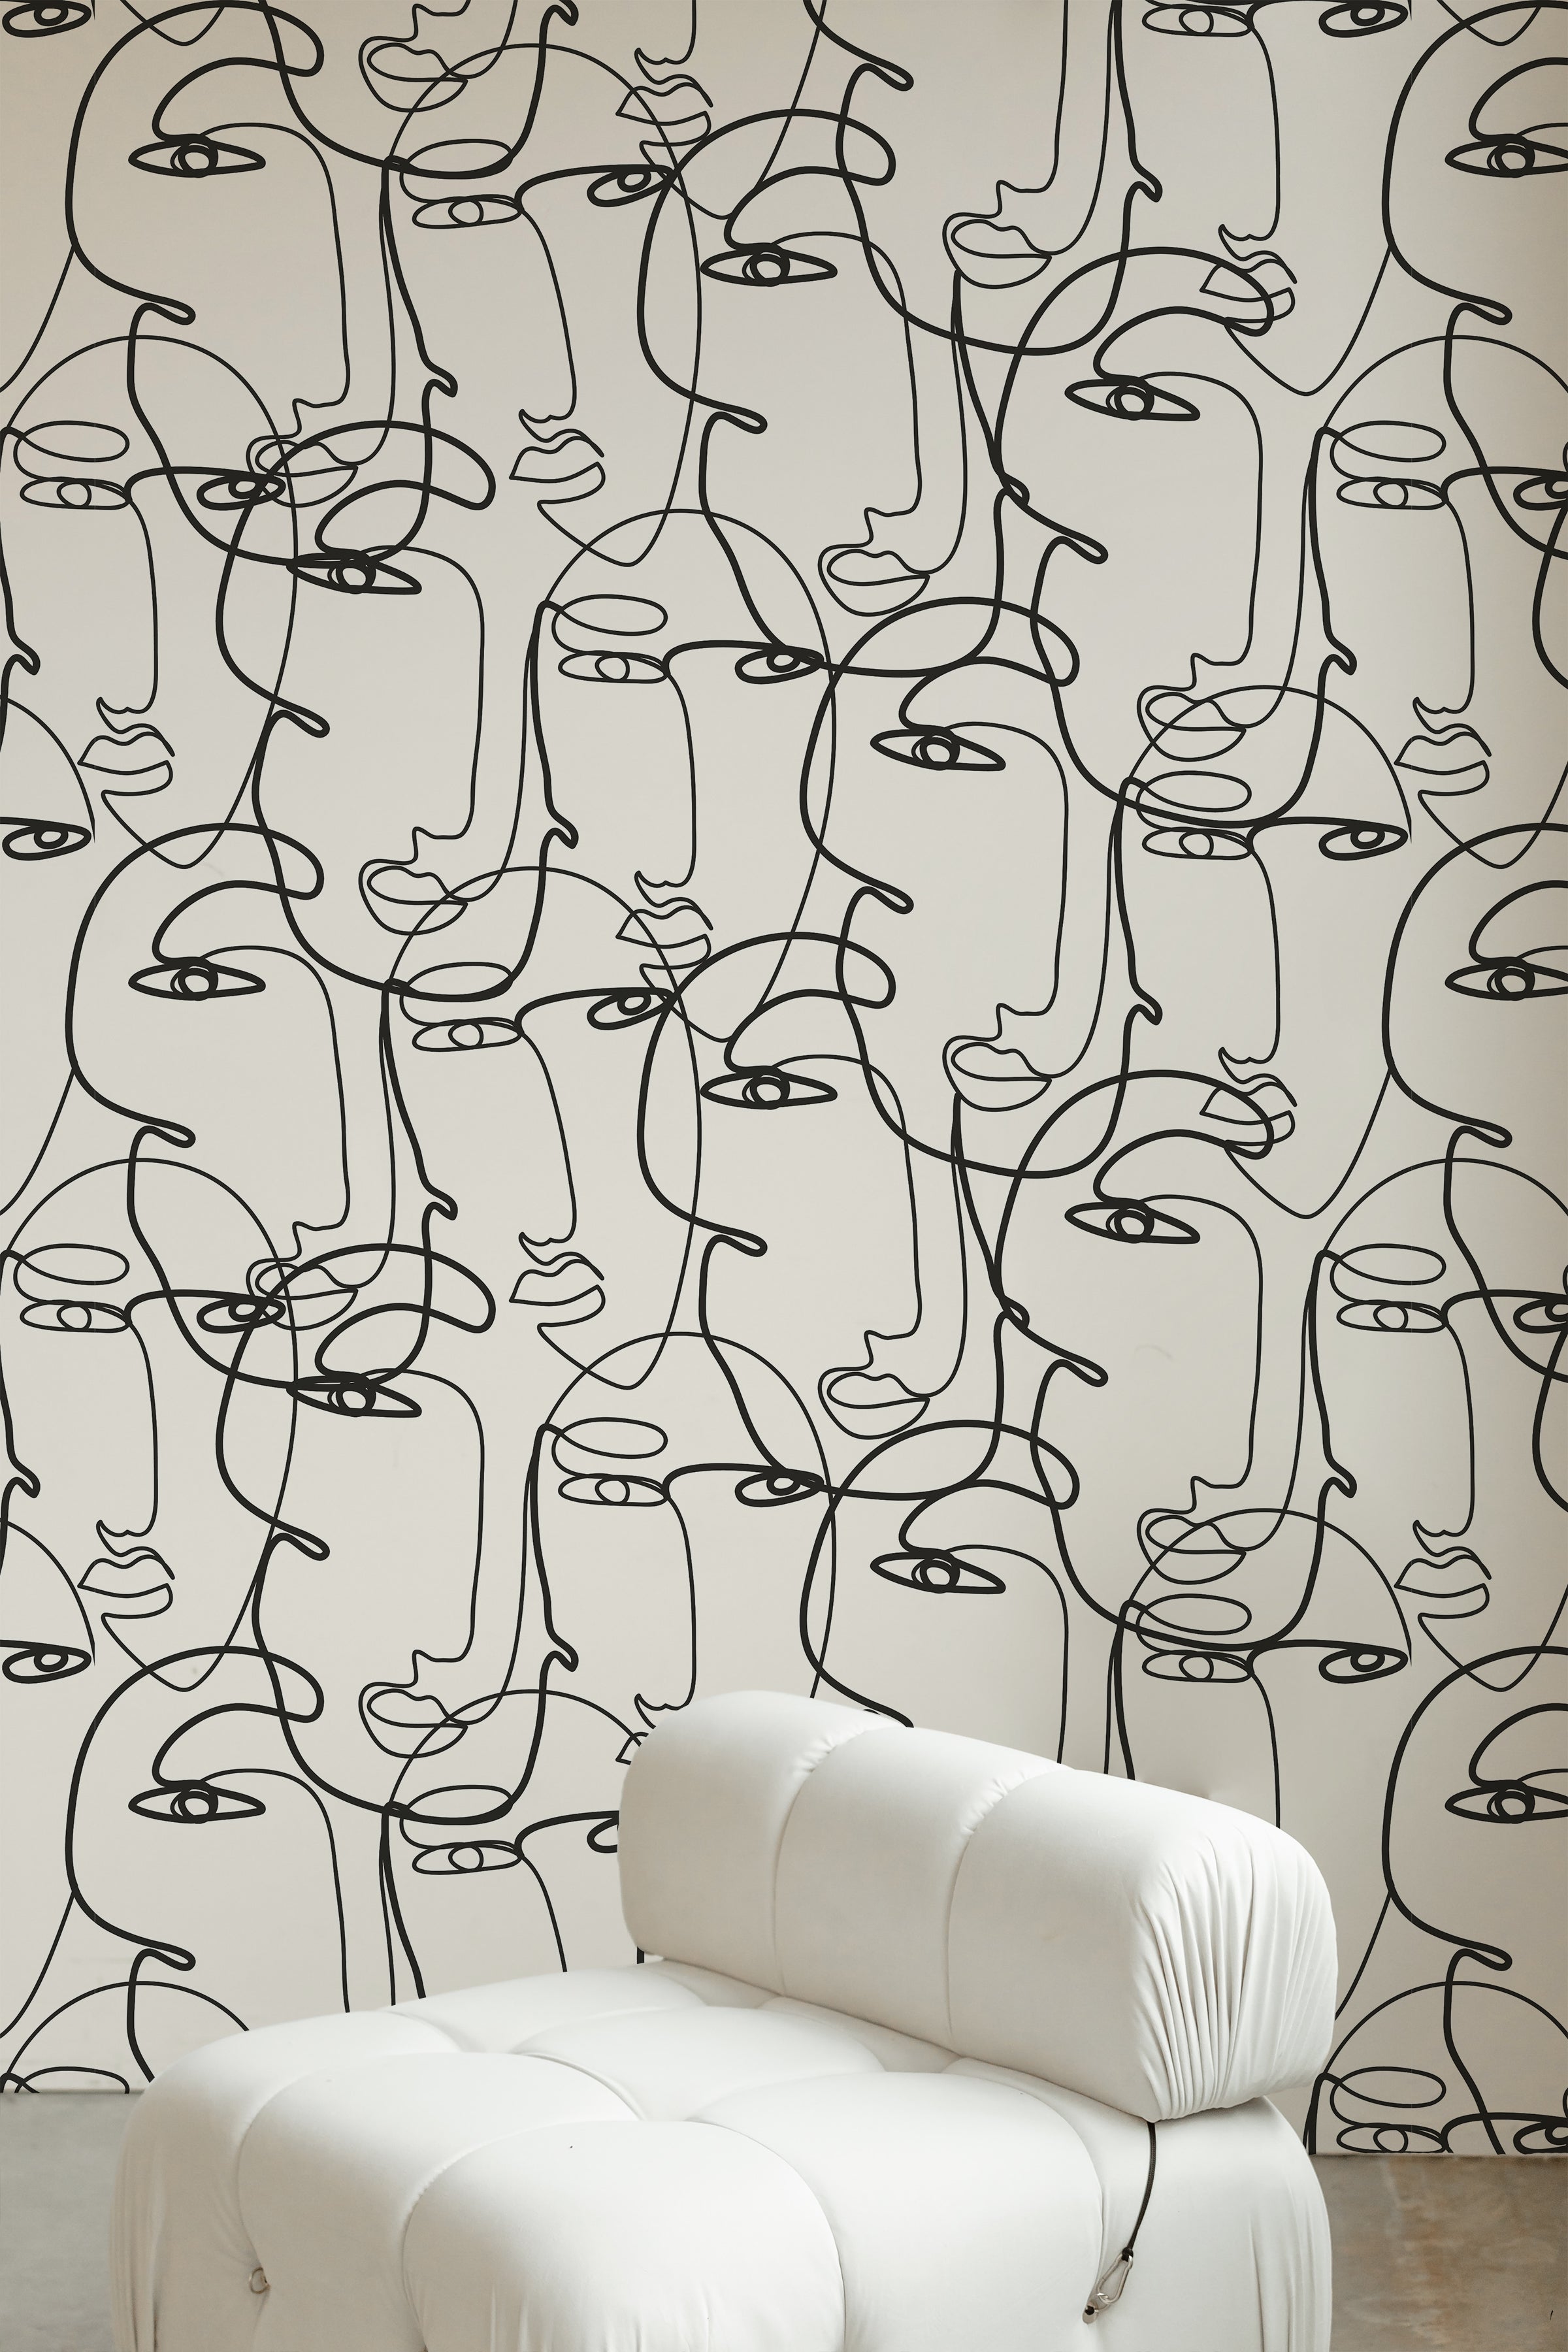 A stylish living area with Minimalist Faces Wallpaper featuring a black line art pattern of abstract faces on a white background. The decor includes a white, tufted chair, adding a touch of elegance to the space.